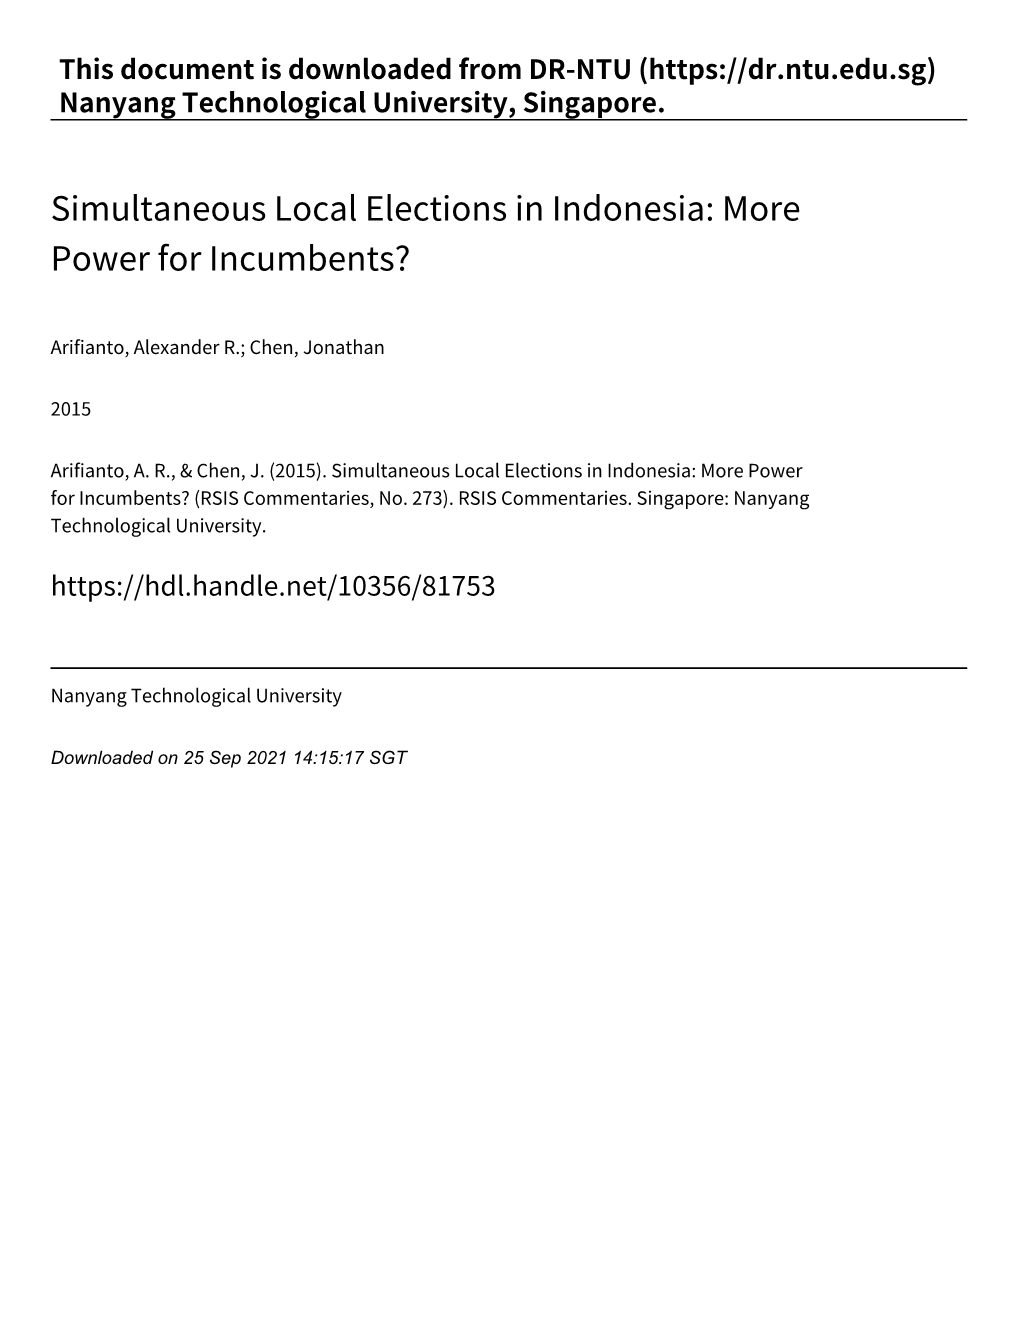 Simultaneous Local Elections in Indonesia: More Power for Incumbents?